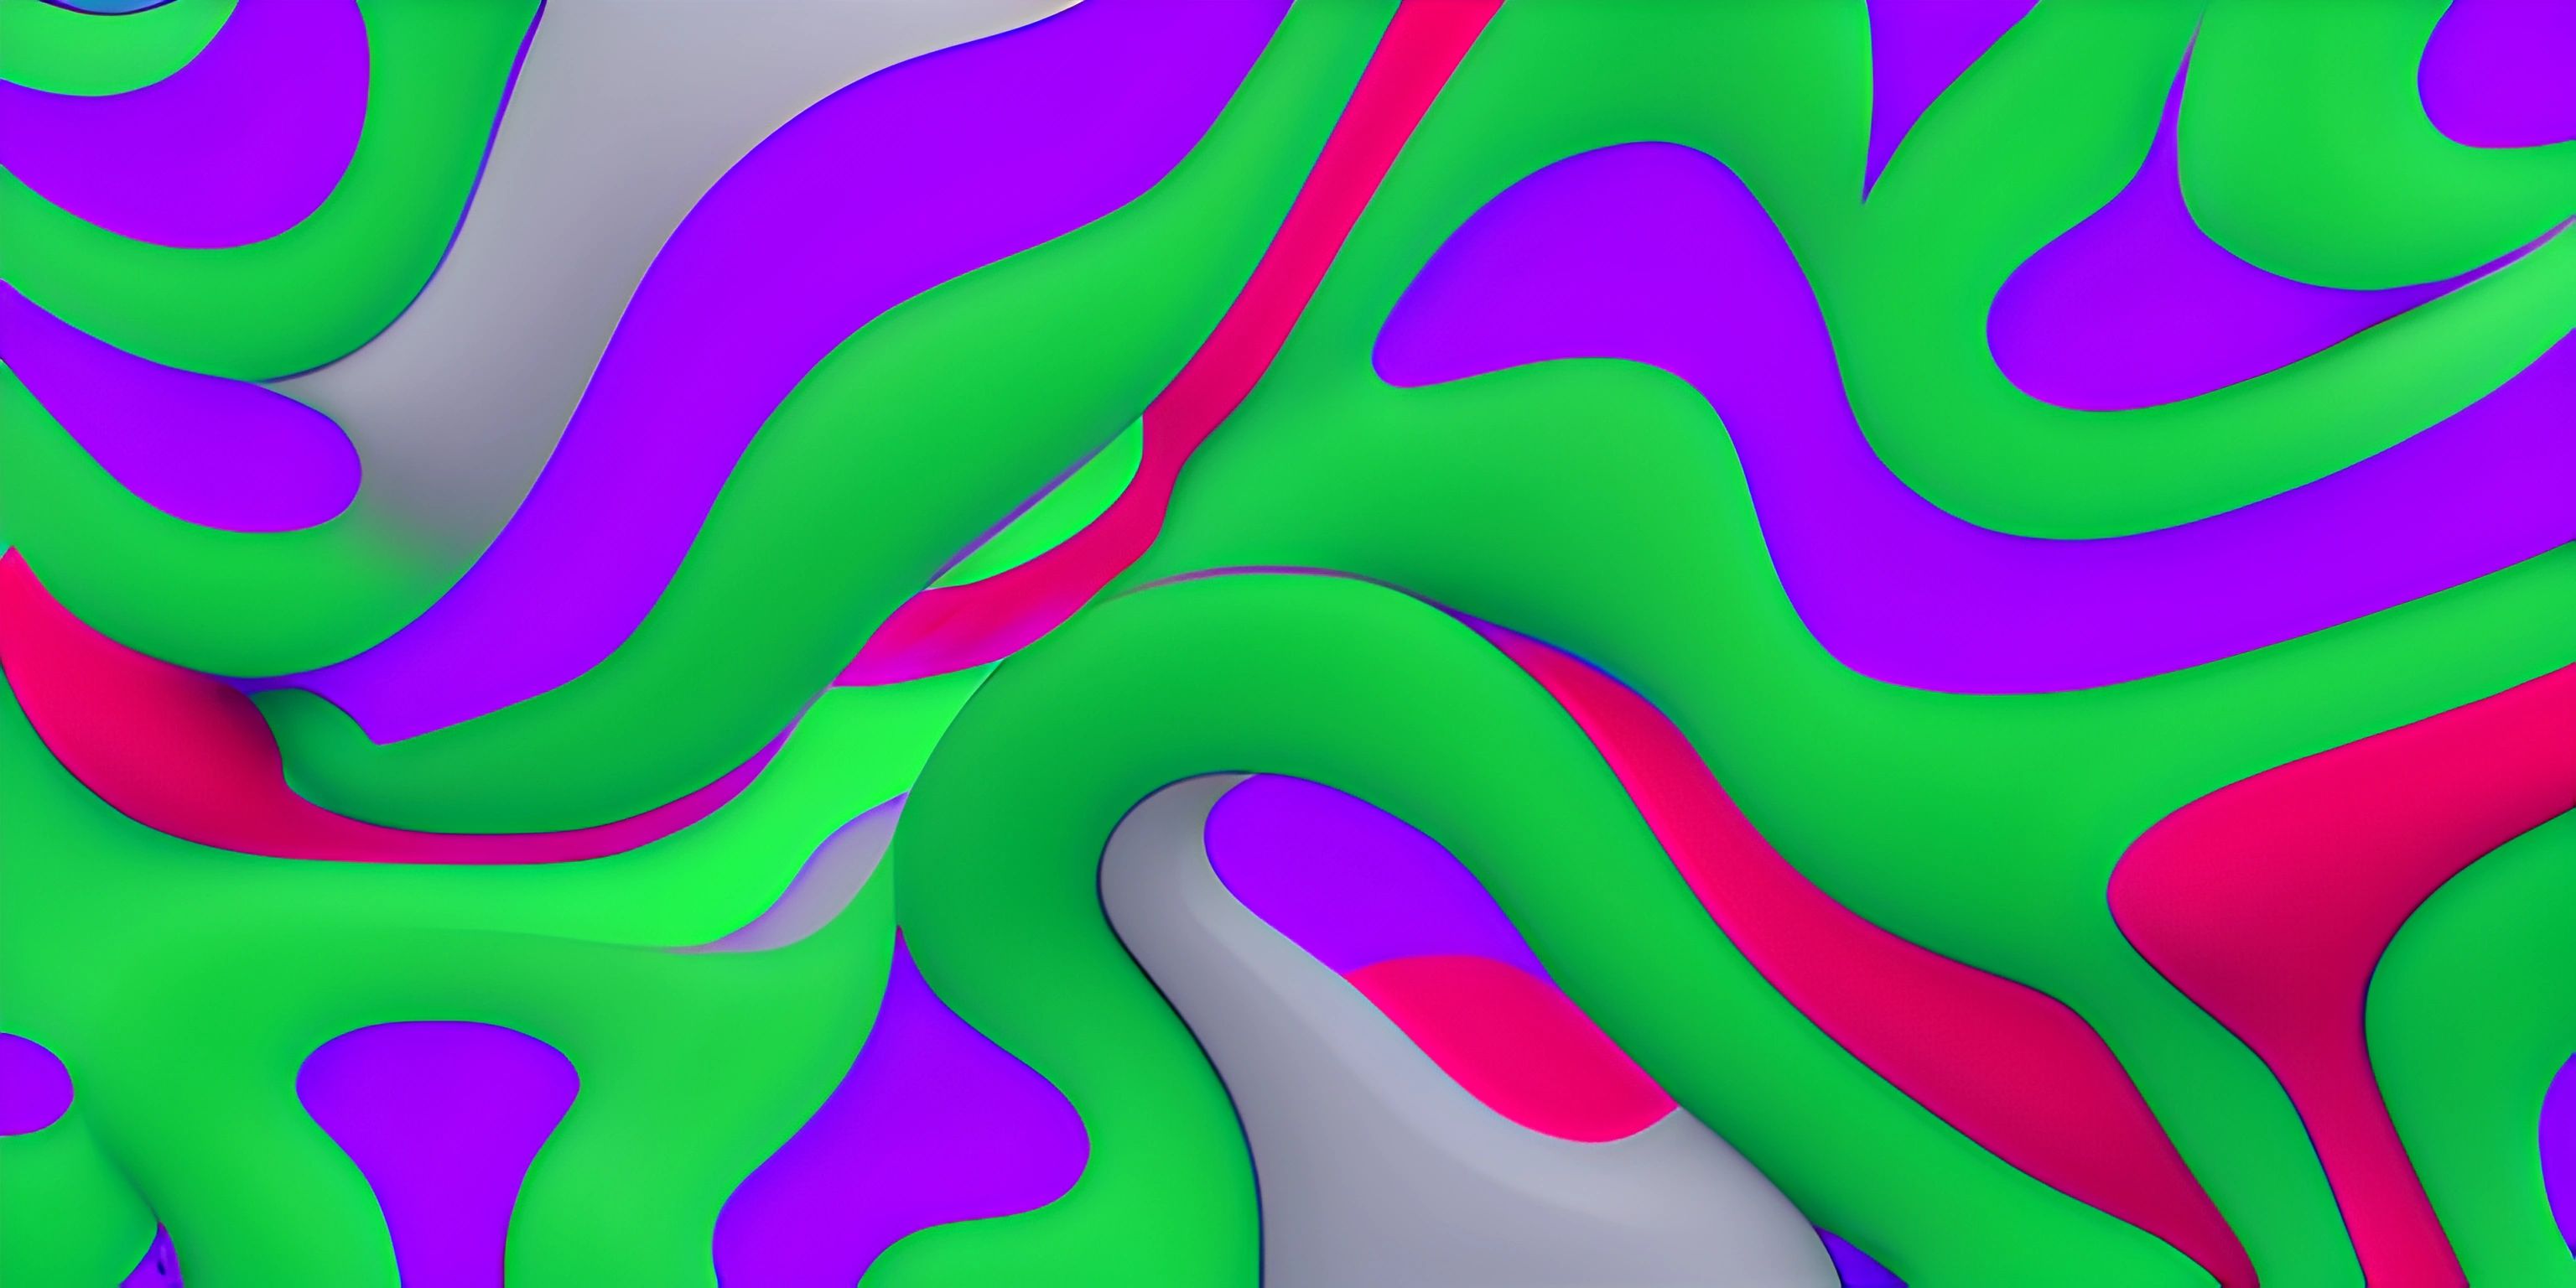 a colored background of a very high - resolution computerized picture of colorful curves and sizes